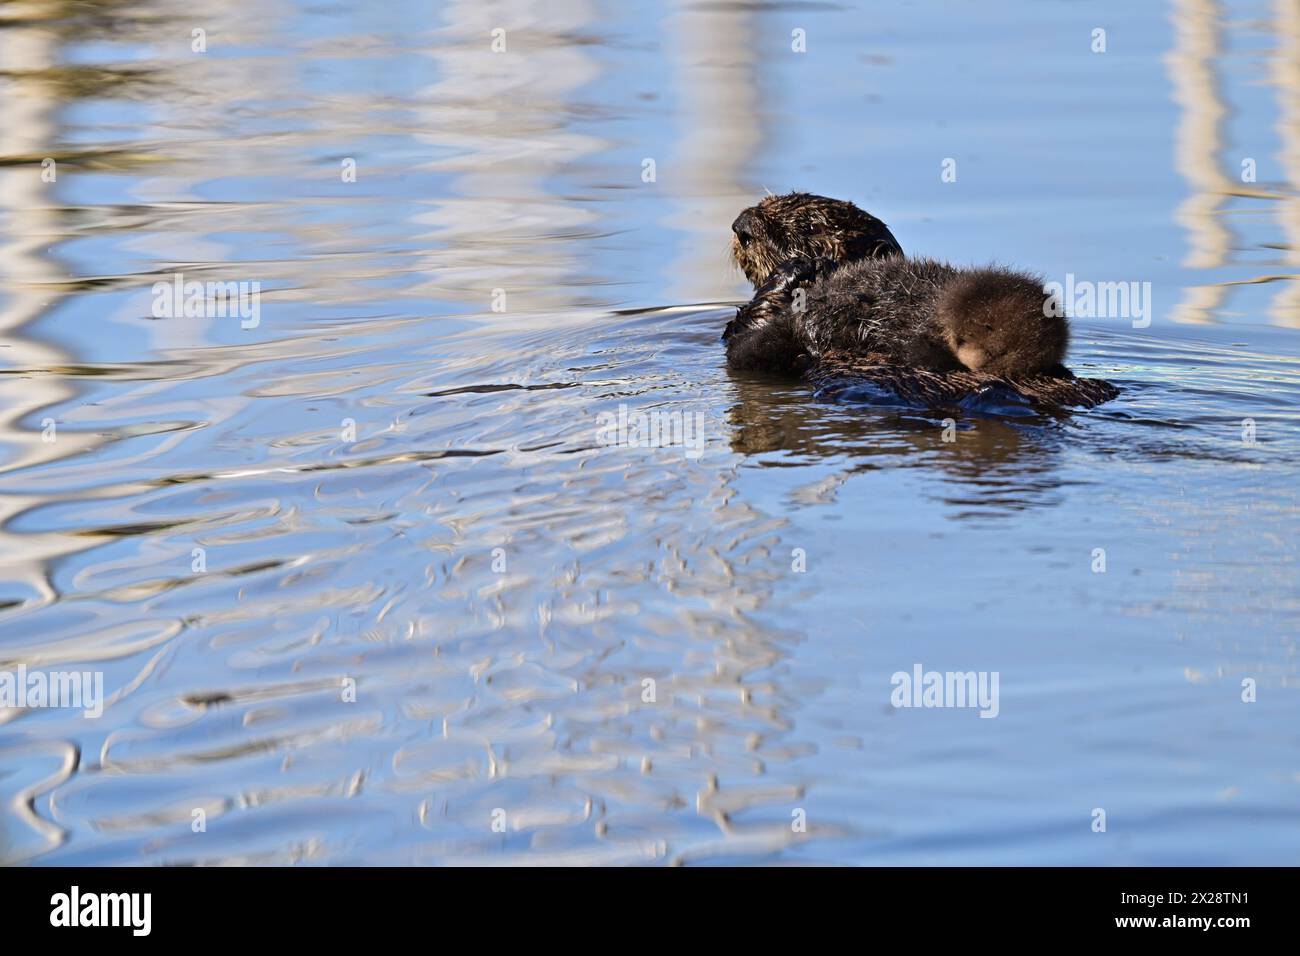 Sea Otter swimming with Pup on the Belly Stock Photo